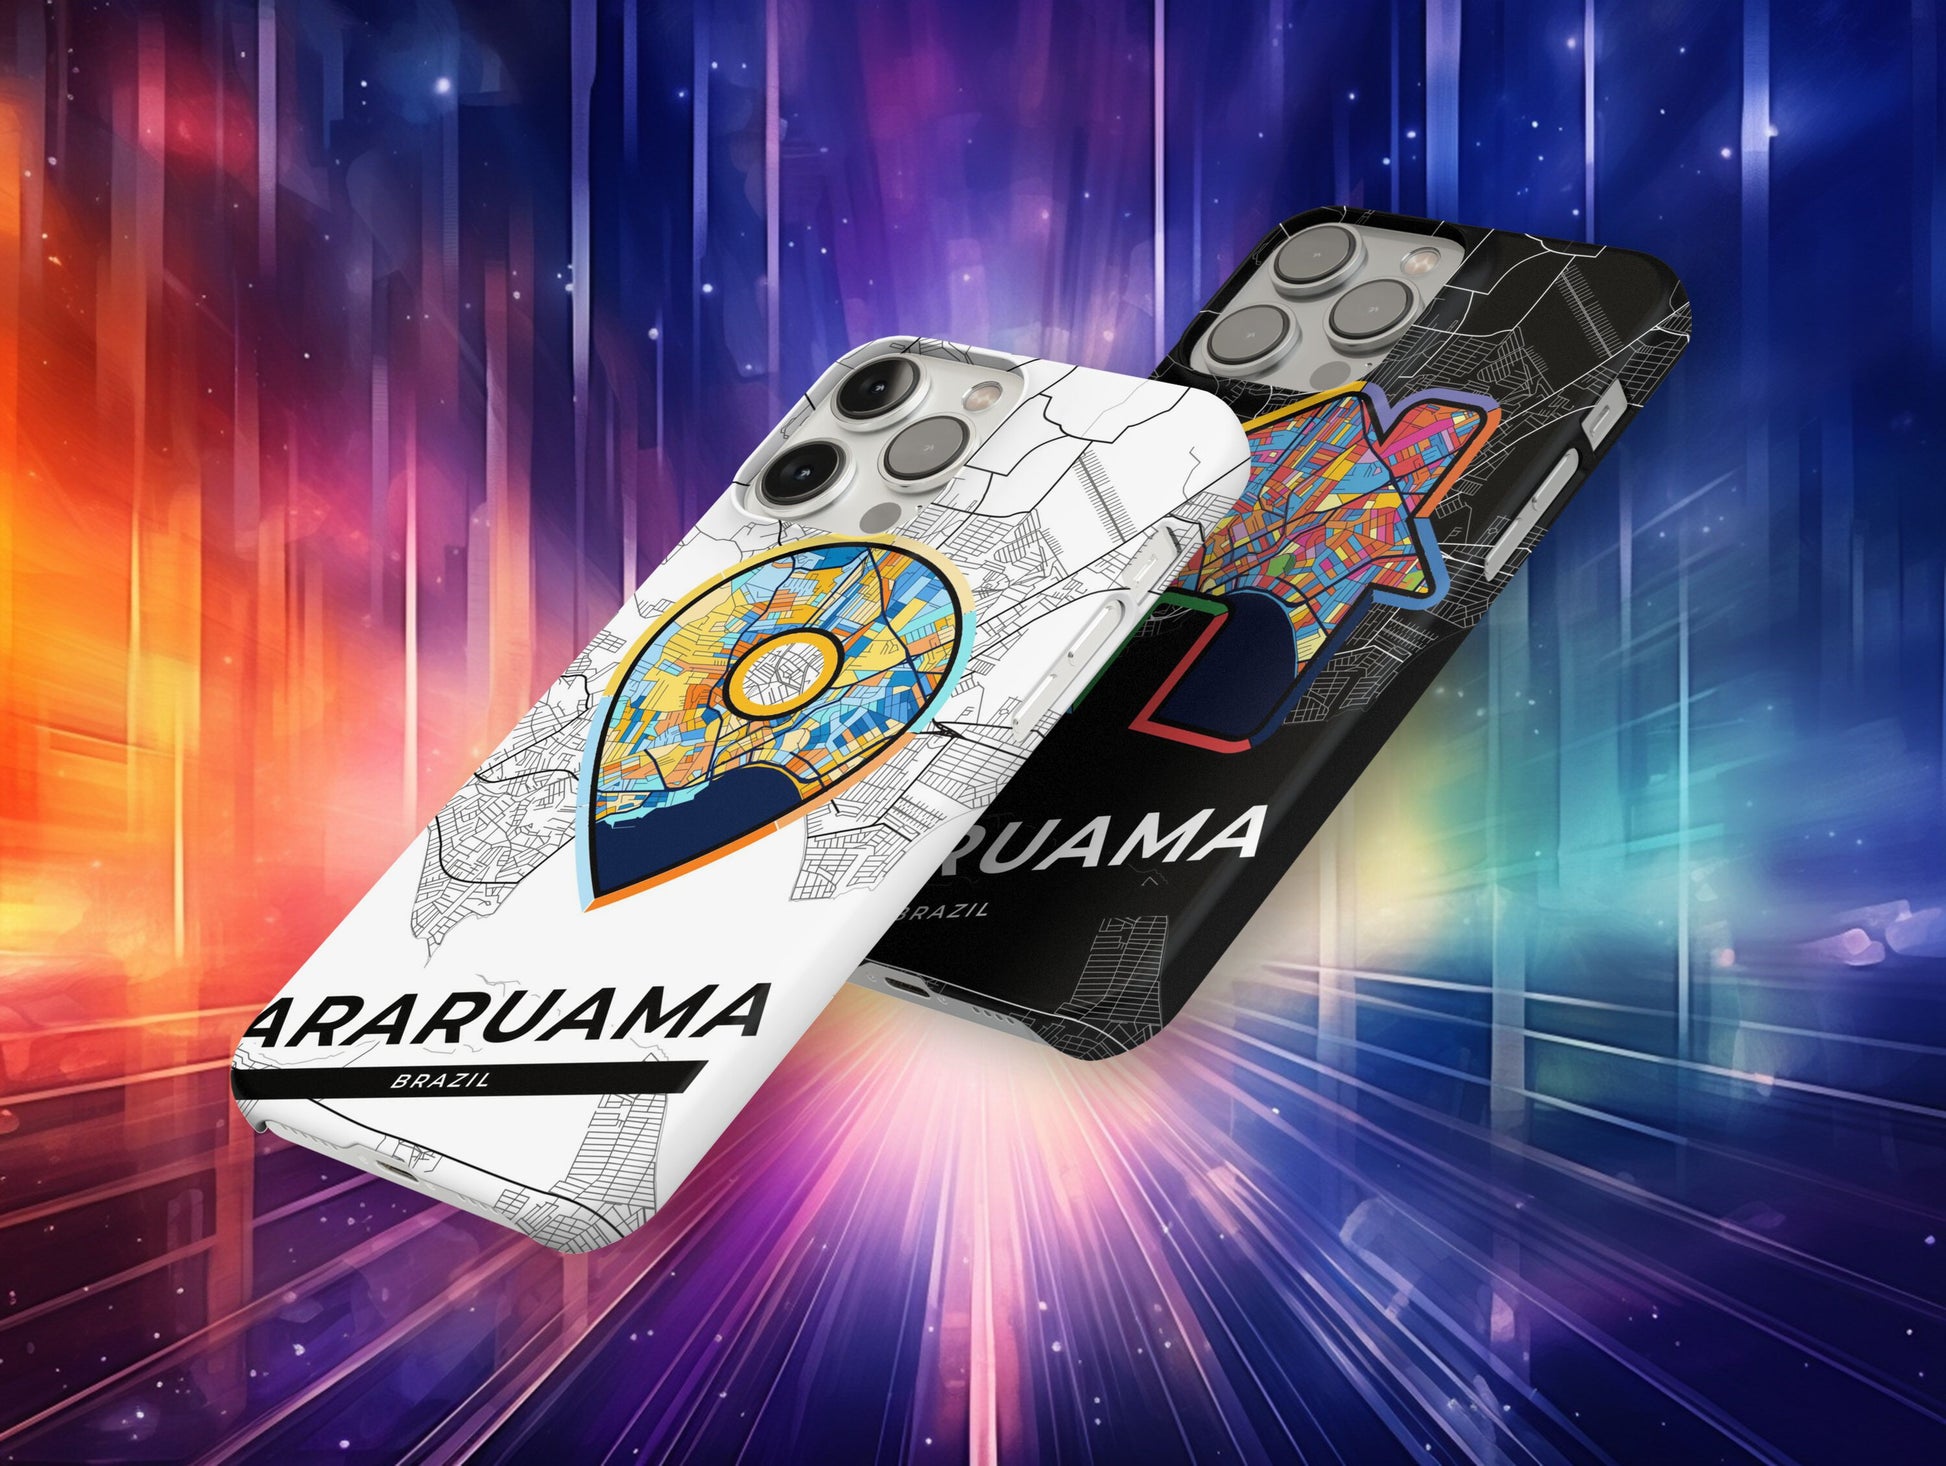 Araruama Brazil slim phone case with colorful icon. Birthday, wedding or housewarming gift. Couple match cases.